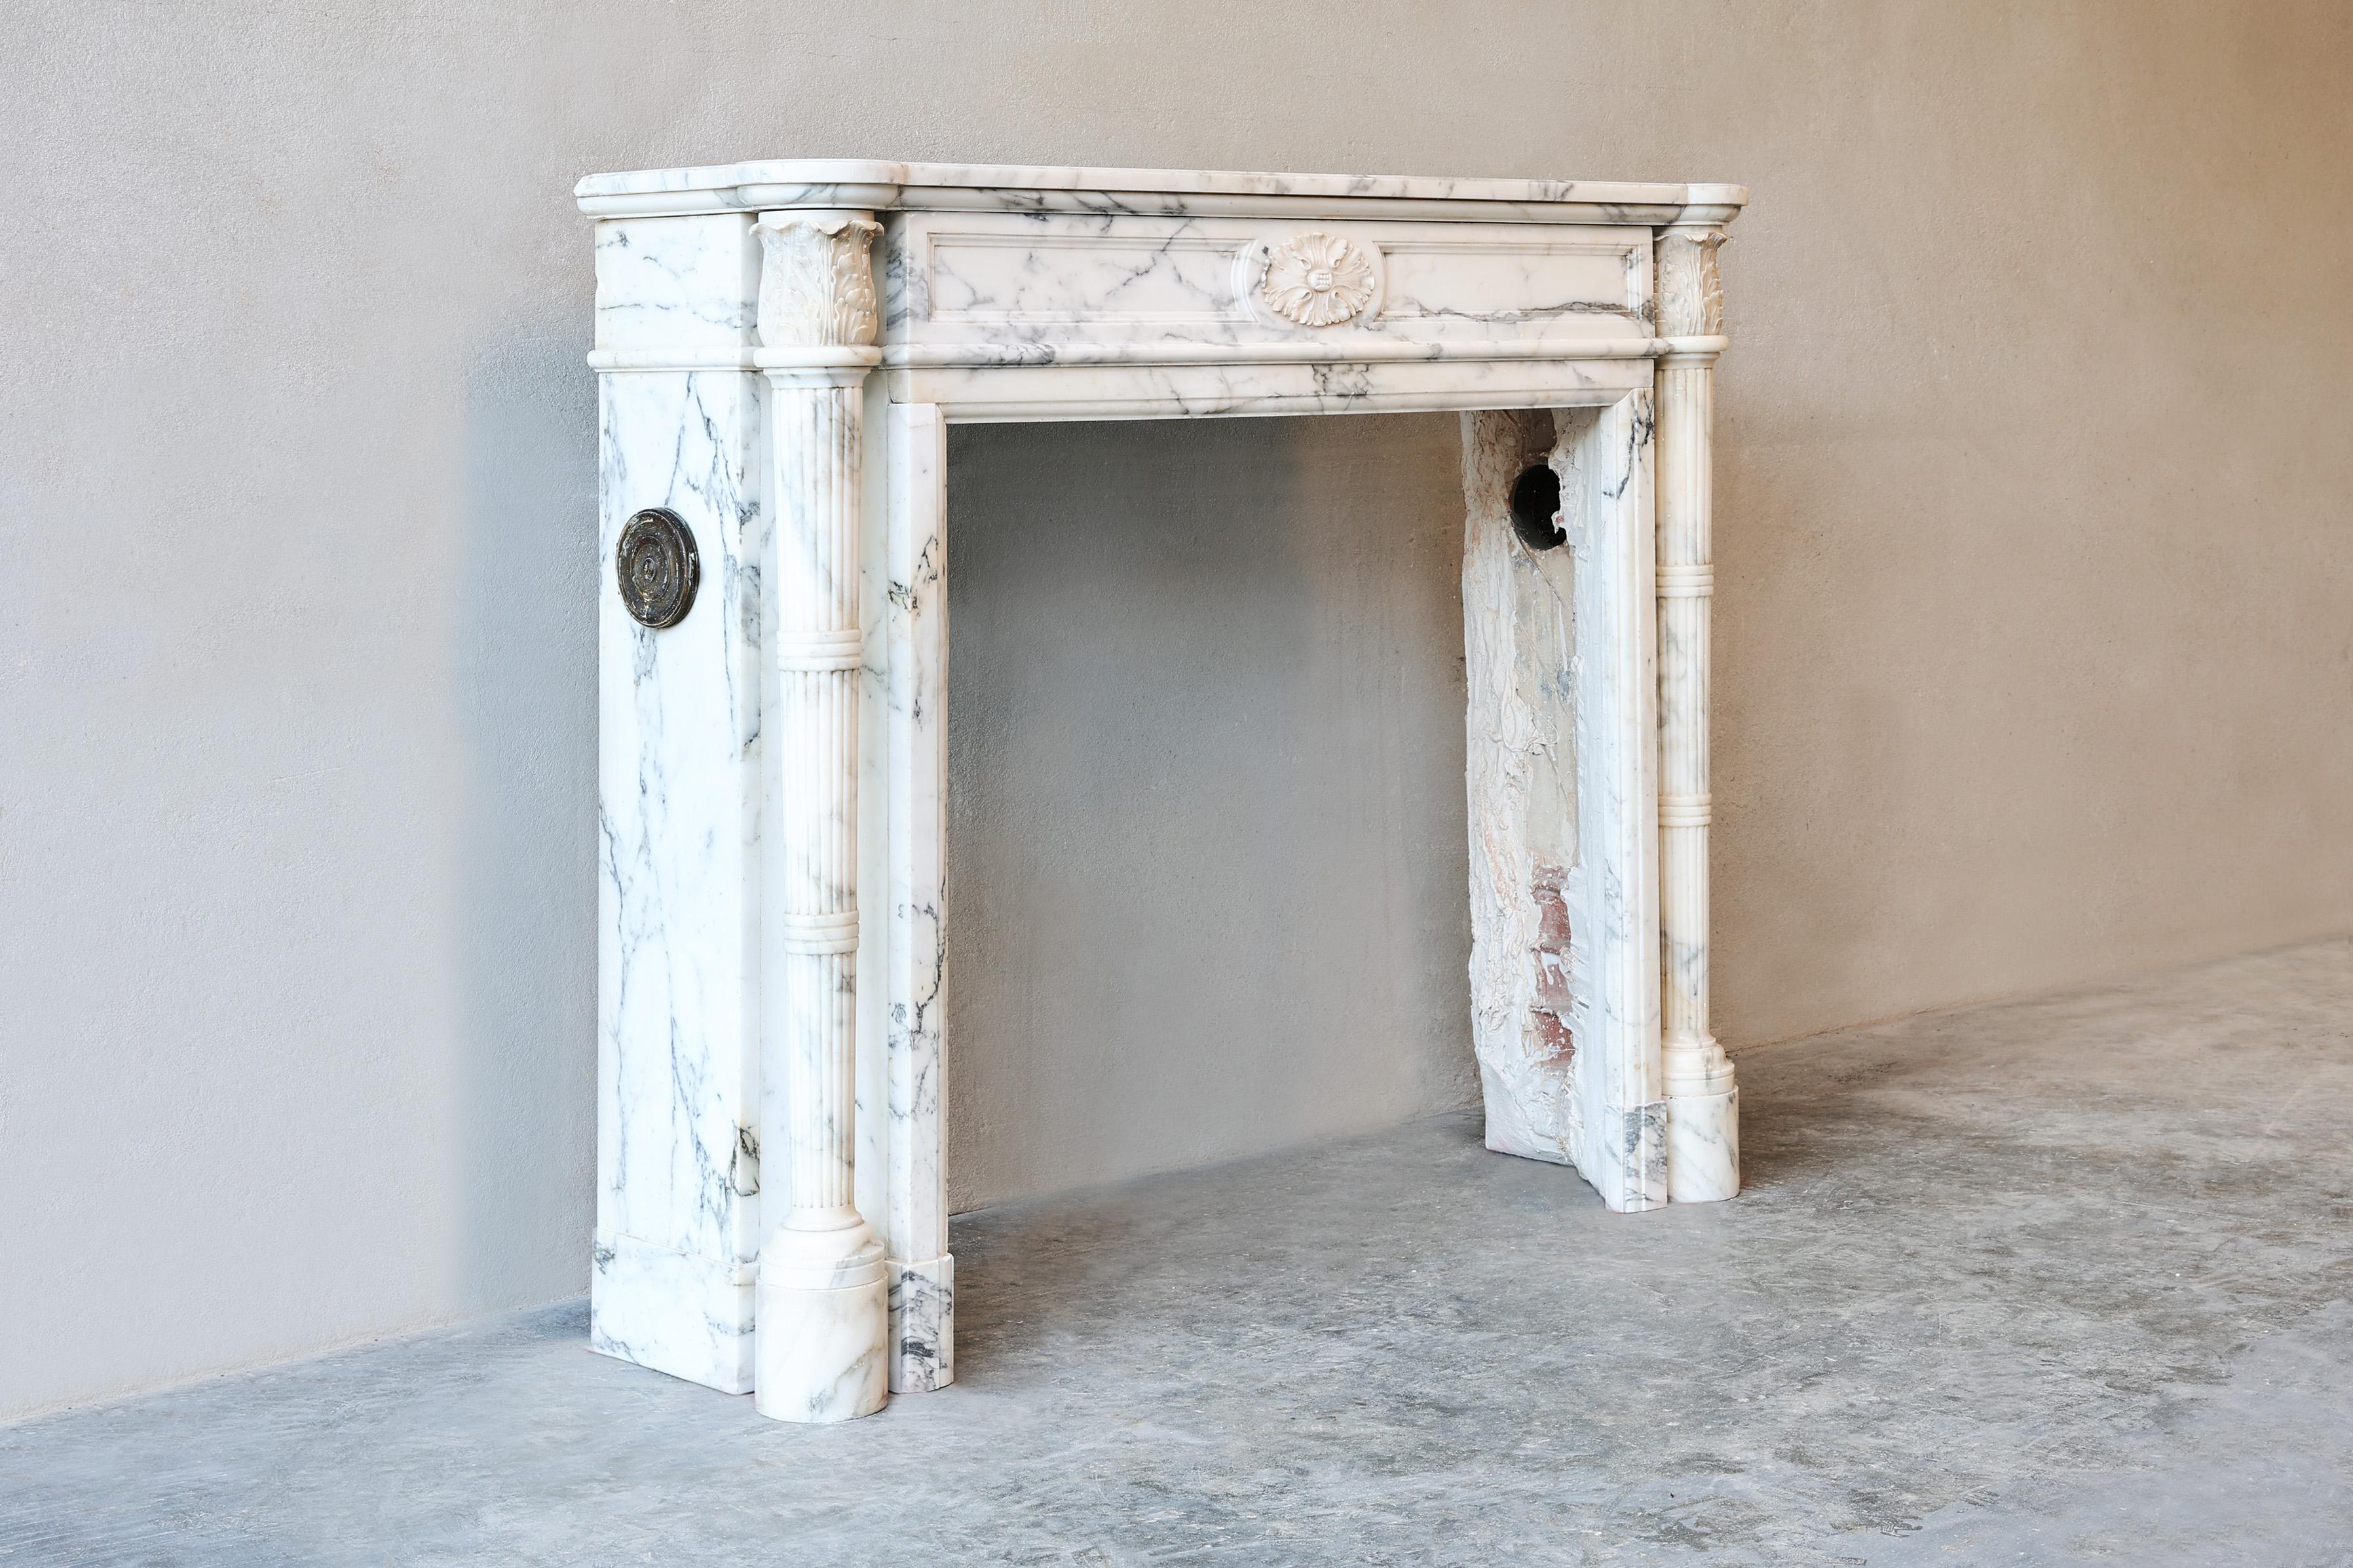 Beautiful antique fireplace of Arabescato marble from the 19th century in style of Louis XVI. This fireplace has a beautiful ornament in the middle of the front part and at the top of the legs. The flutes on the legs also gives this fireplace a nice